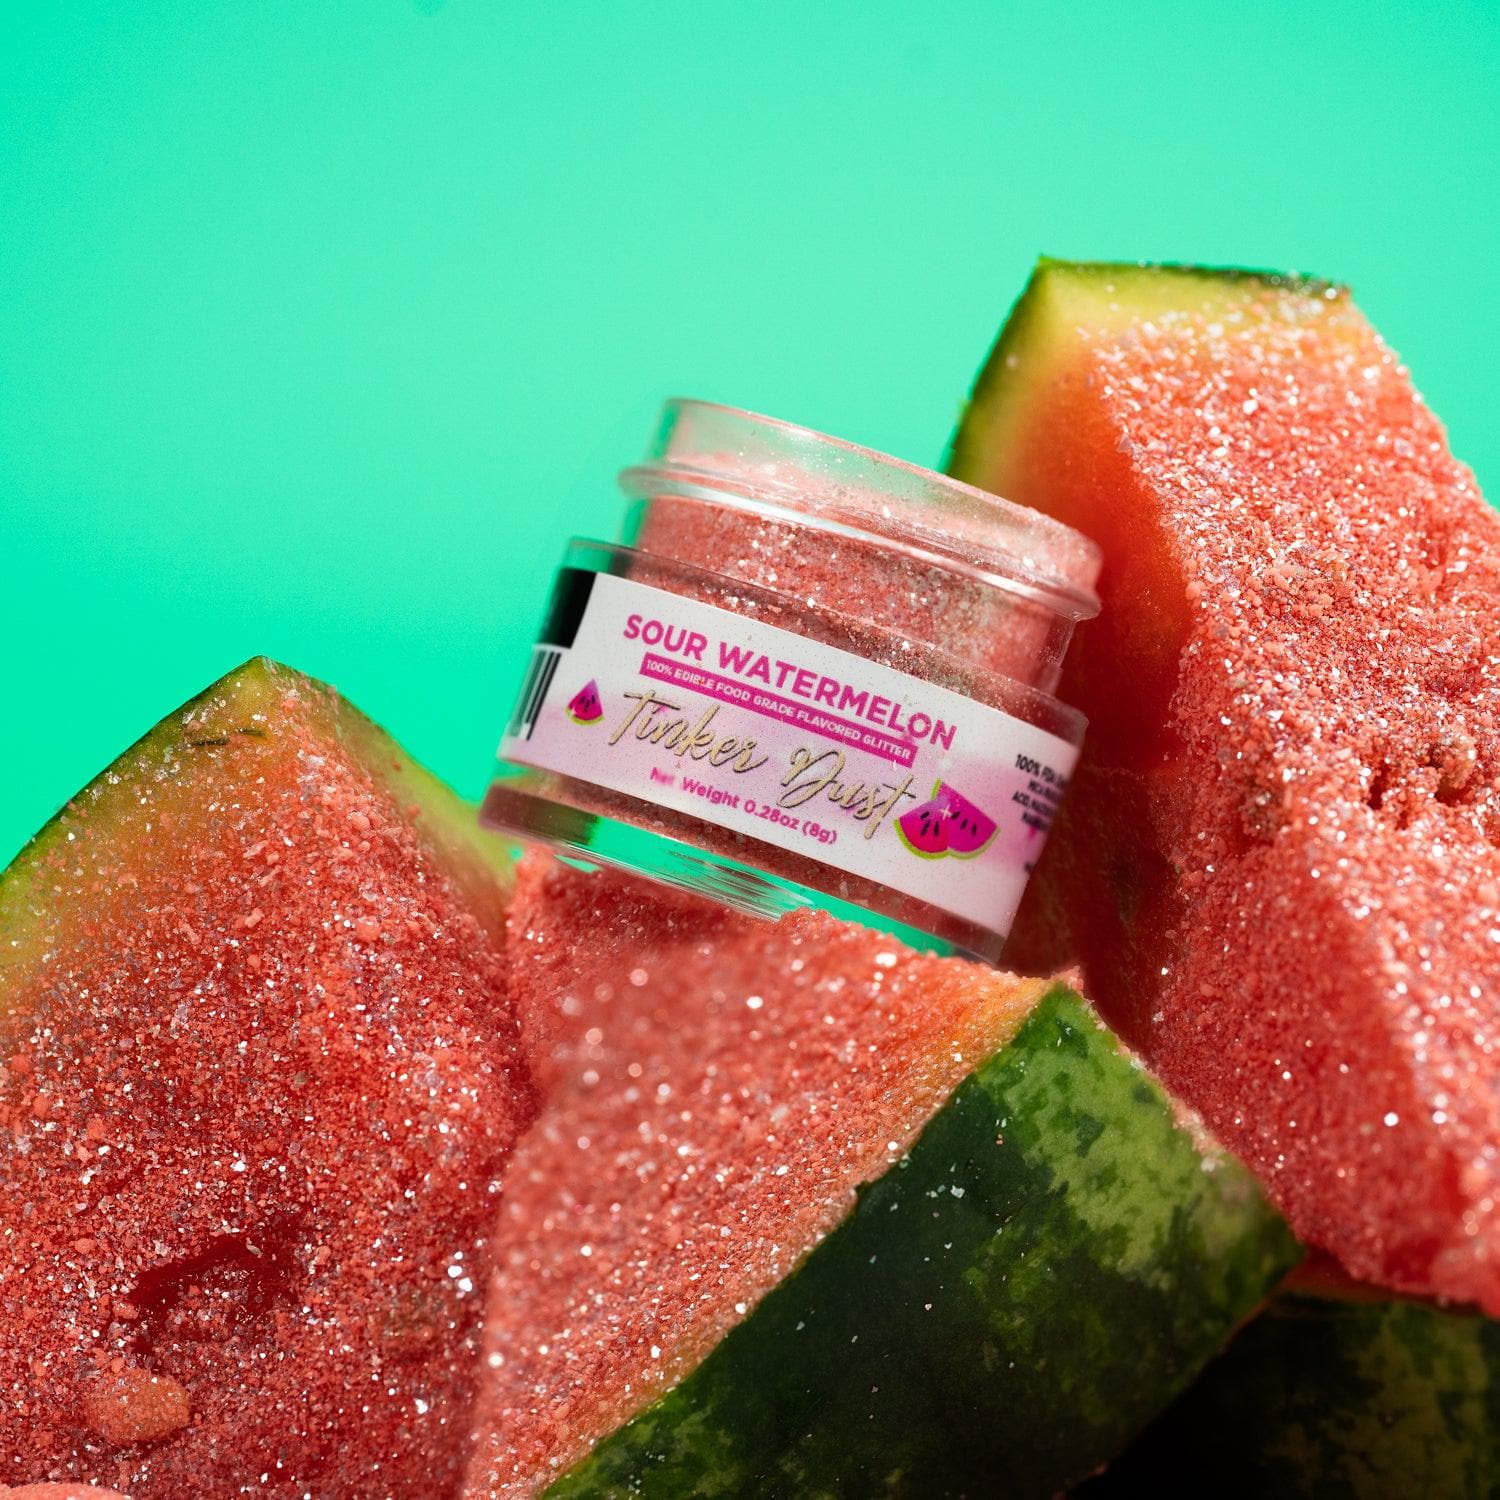 Buy Sour Watermelon Flavored Tinker Dust - Powder Candy - Bakell